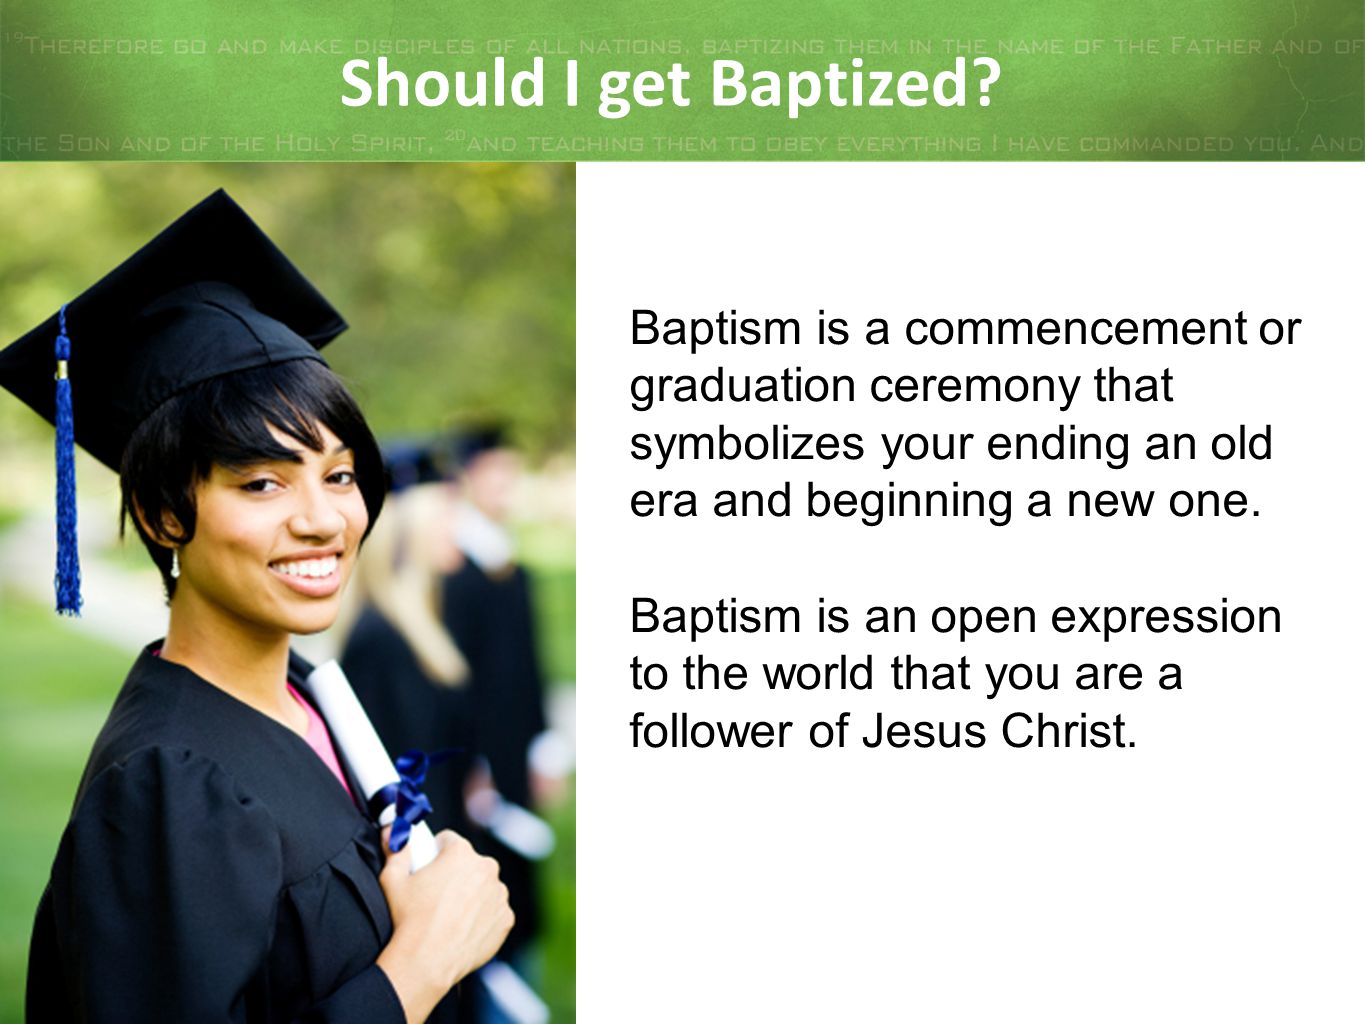 Should I get Baptized Baptism is a commencement or graduation ceremony that symbolizes your ending an old era and beginning a new one.